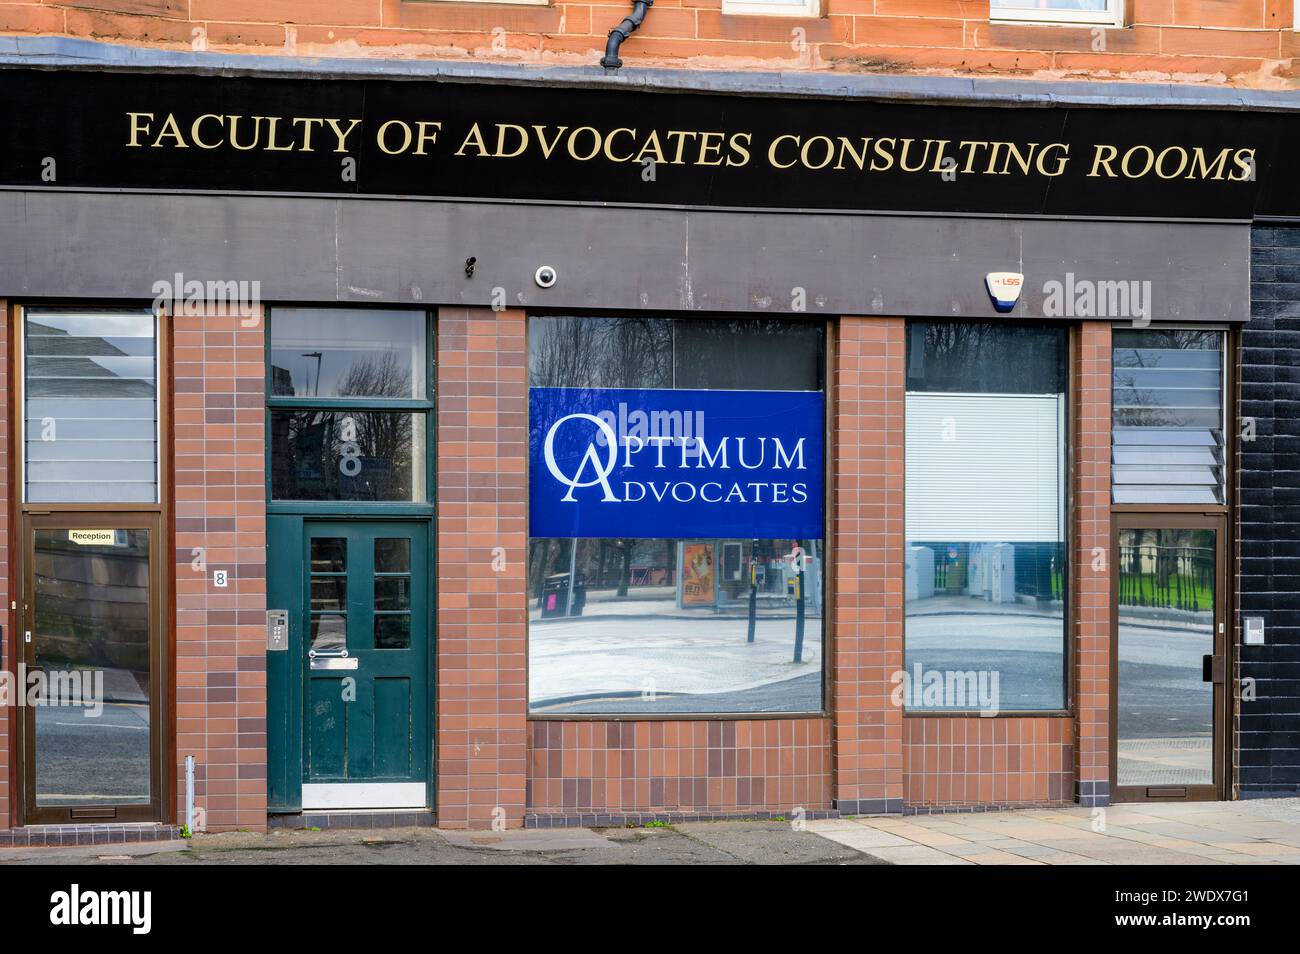 Faculty of Advocates Consulting Rooms, Jocelyn Square, Glasgow, Scotland, UK, Europe Stock Photo